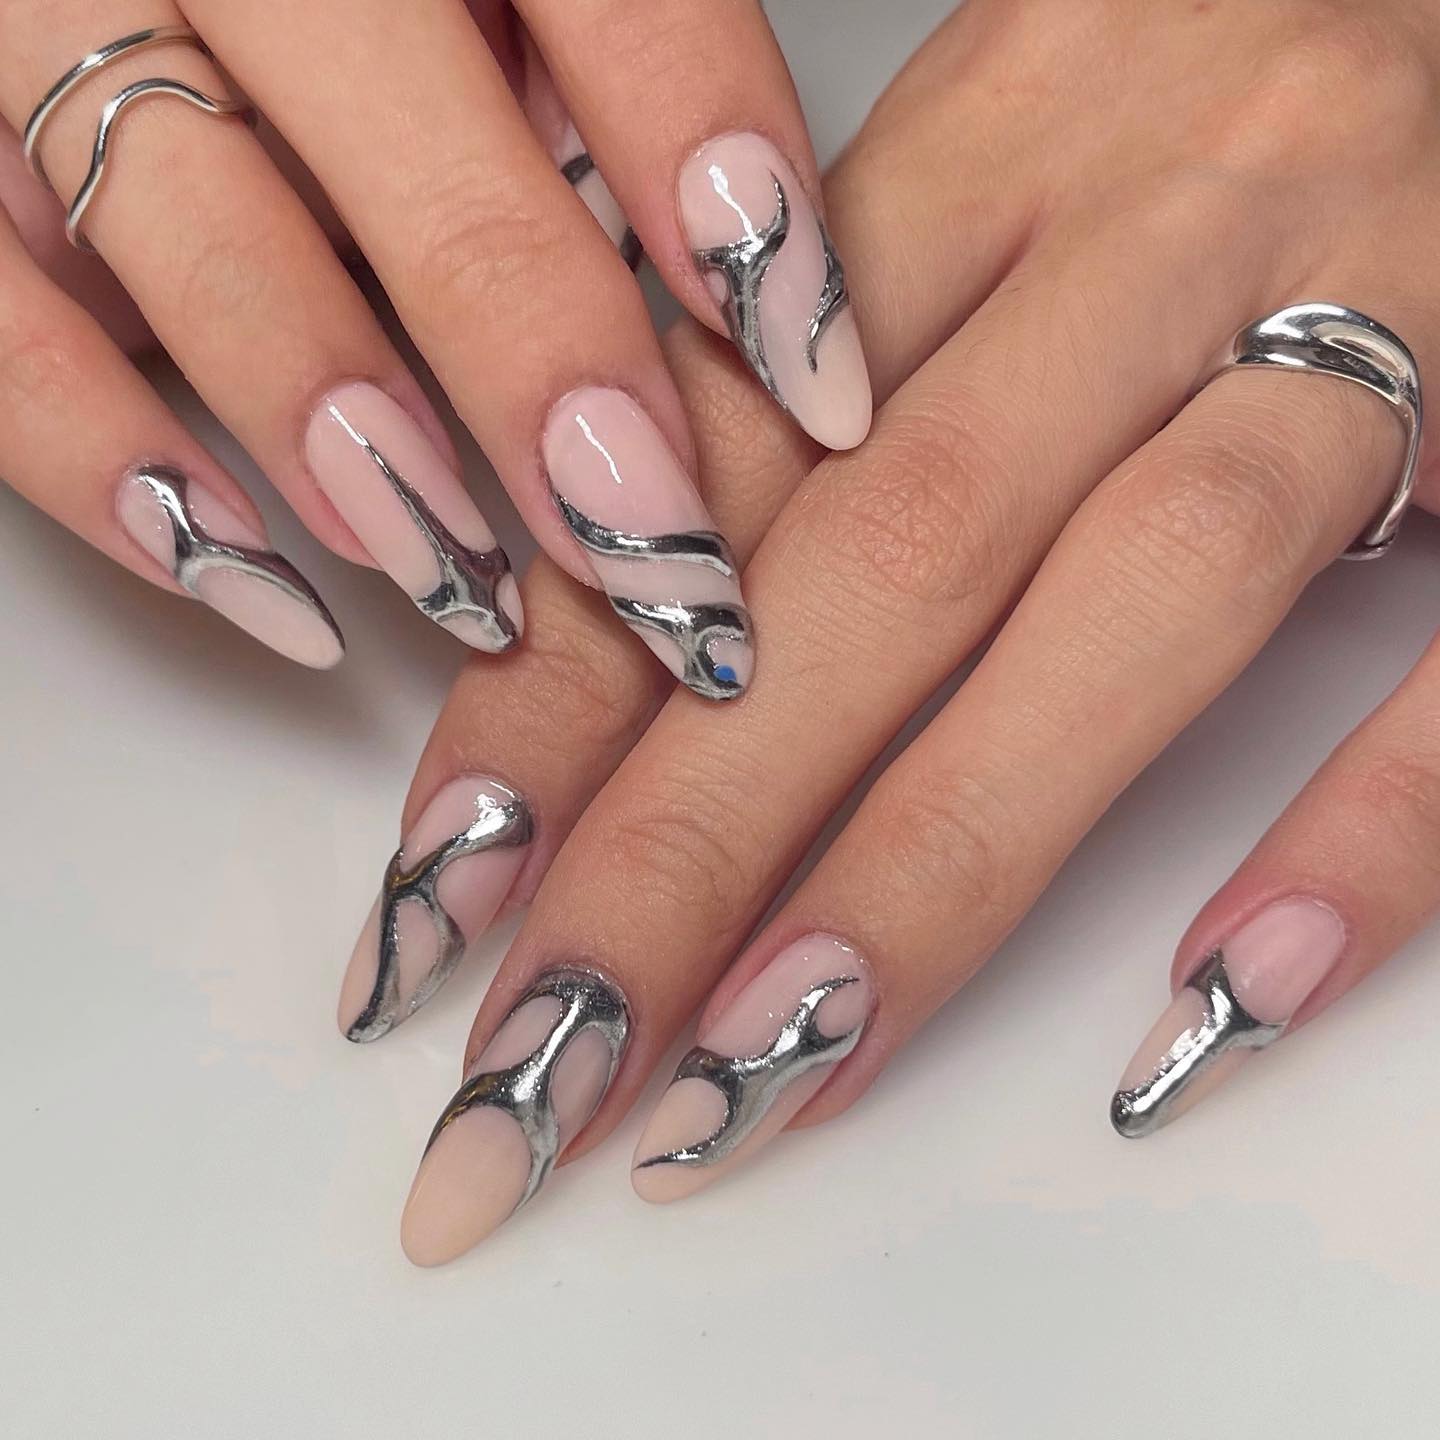 This nail art gives the expression of a molten metal, doesn't it? It has a really exotic look, so go for it.